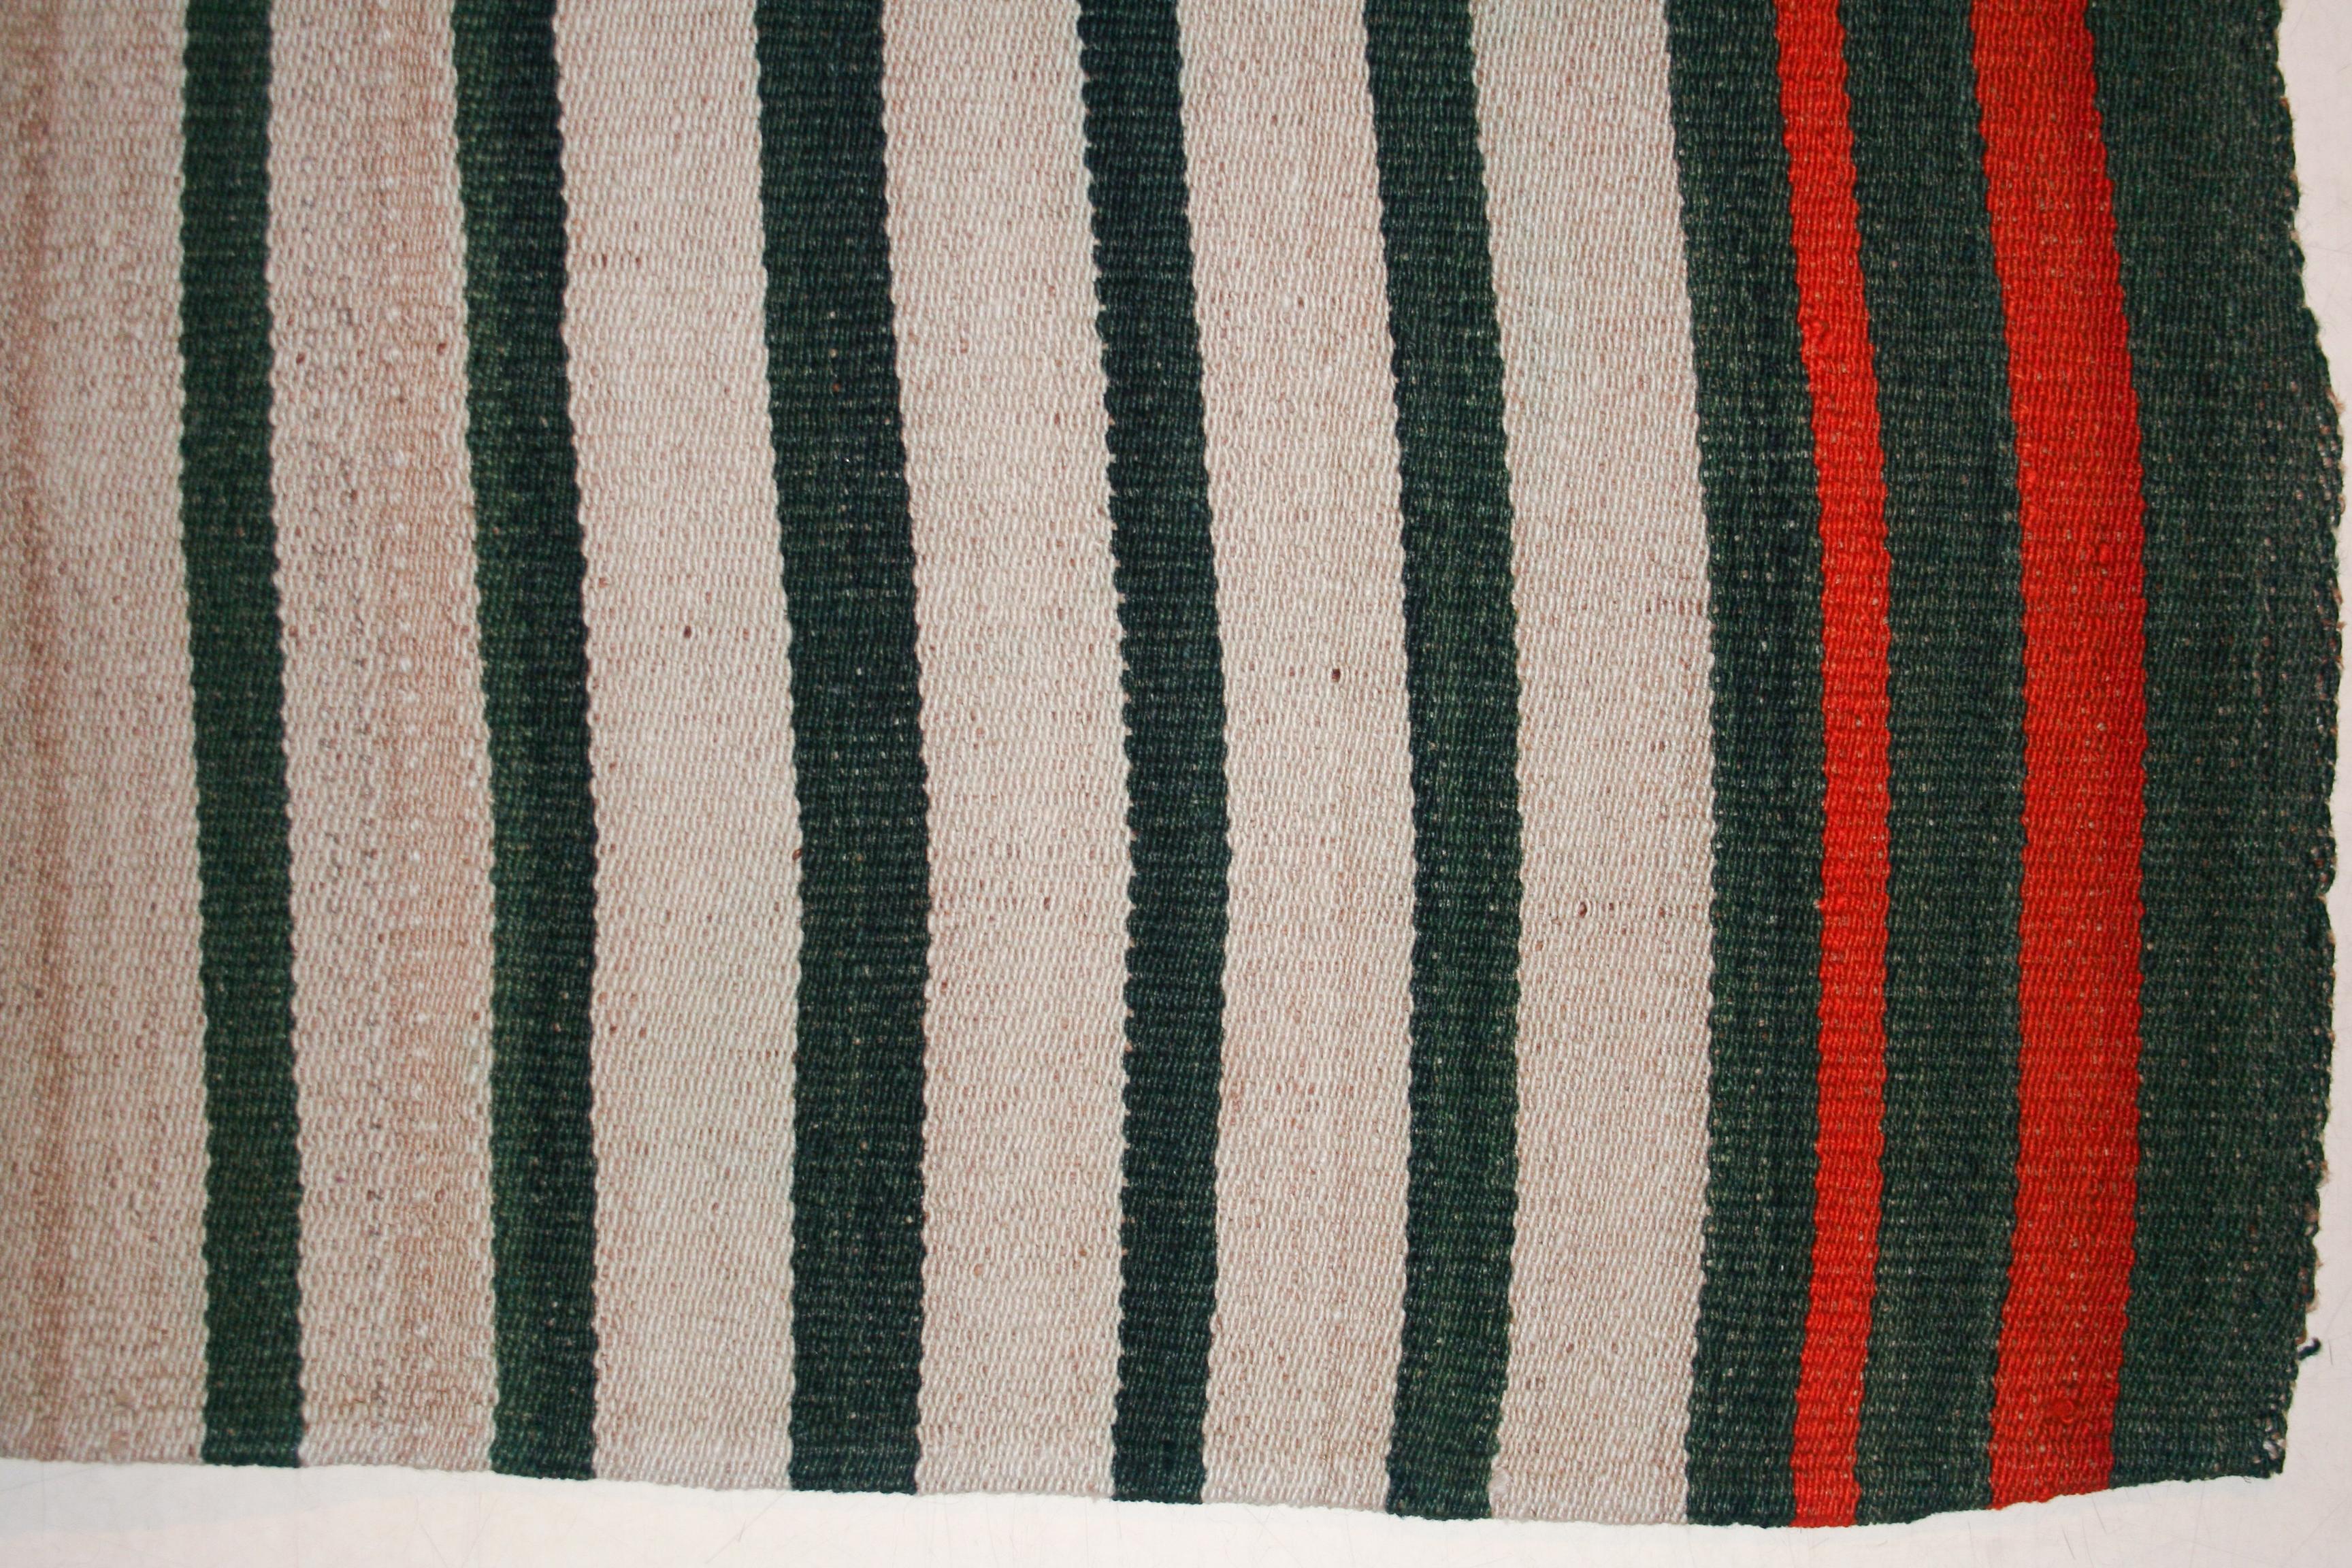 A very graphic tribal jajim wool flat-weave composed of two joined panels each containing an array of forest green stripes of varying widths on an ivory background. The result is a wool flat-weave with a mirror image pattern having a central stripe